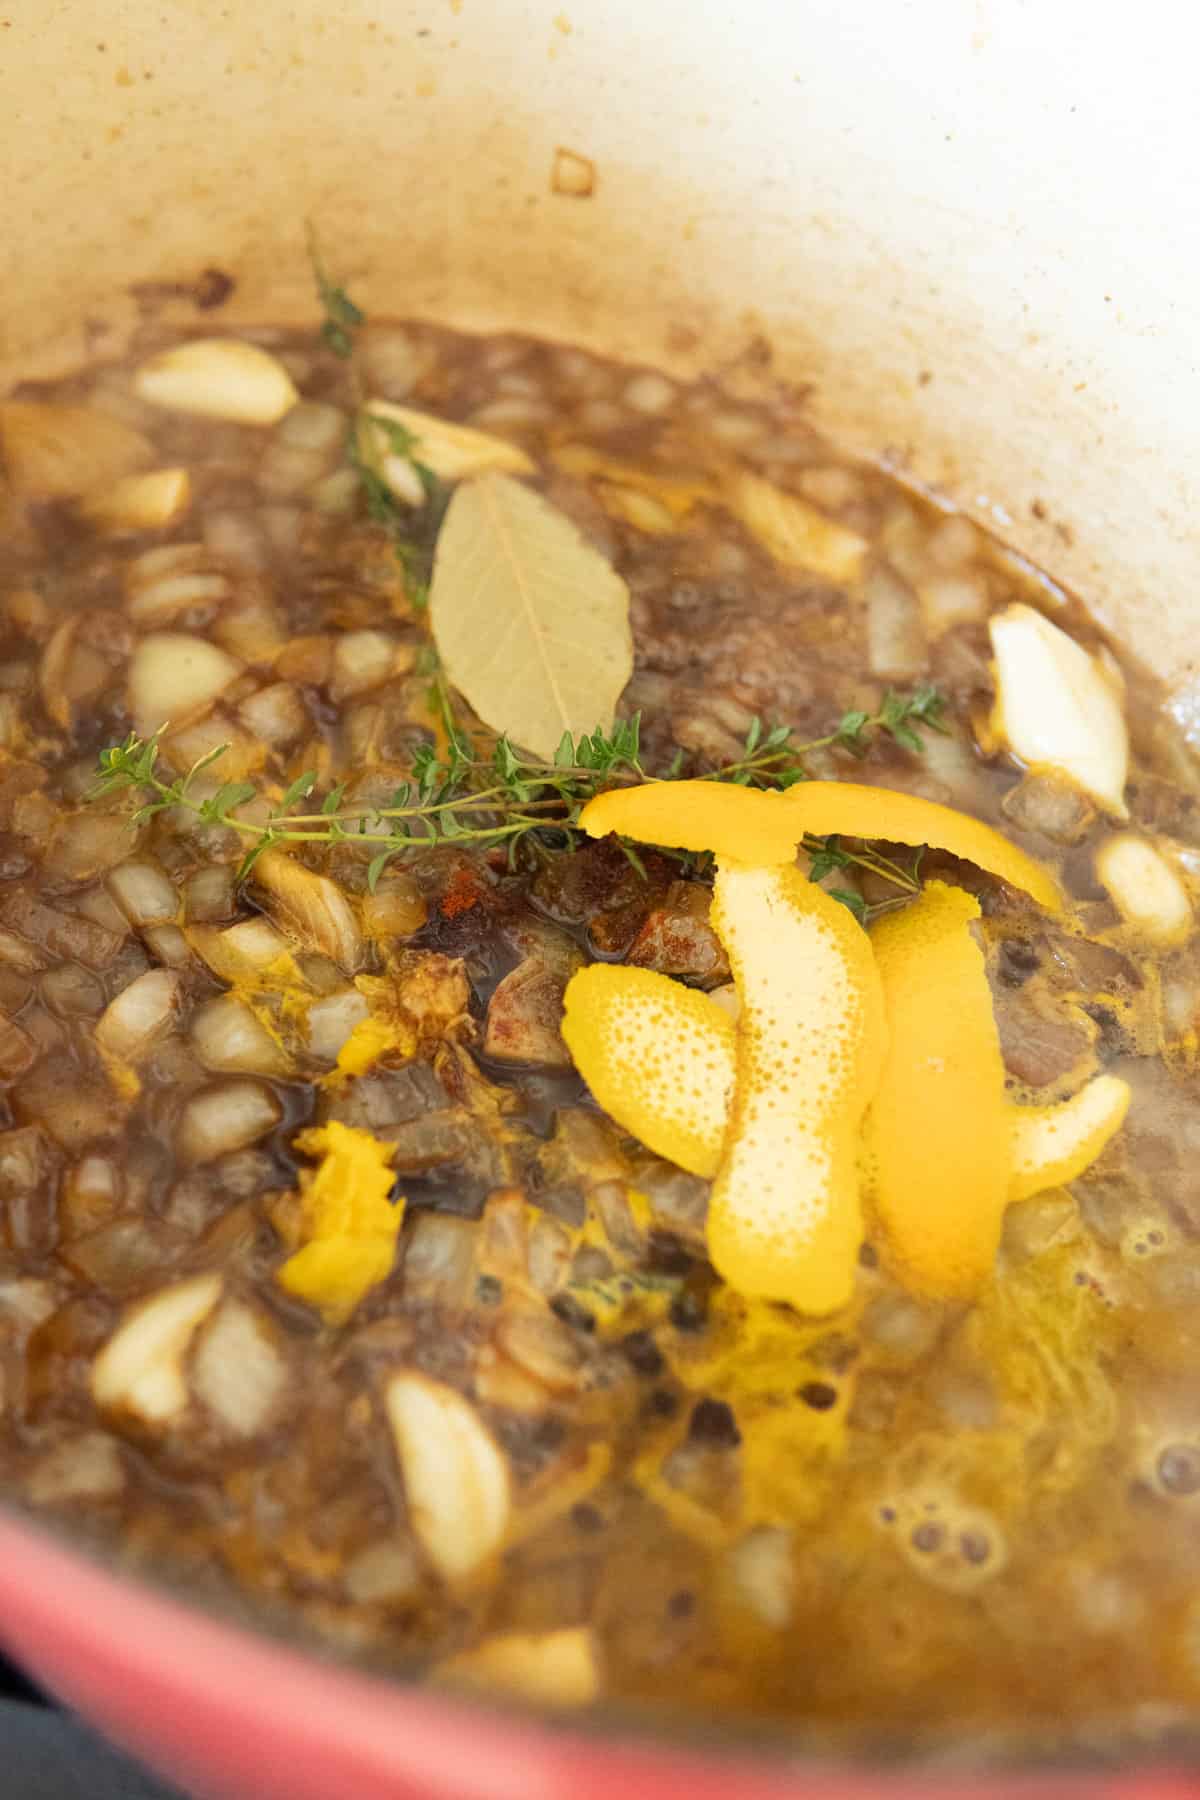 Beef stock with onions, seasonings, thyme and orange peels simmering in a pot.